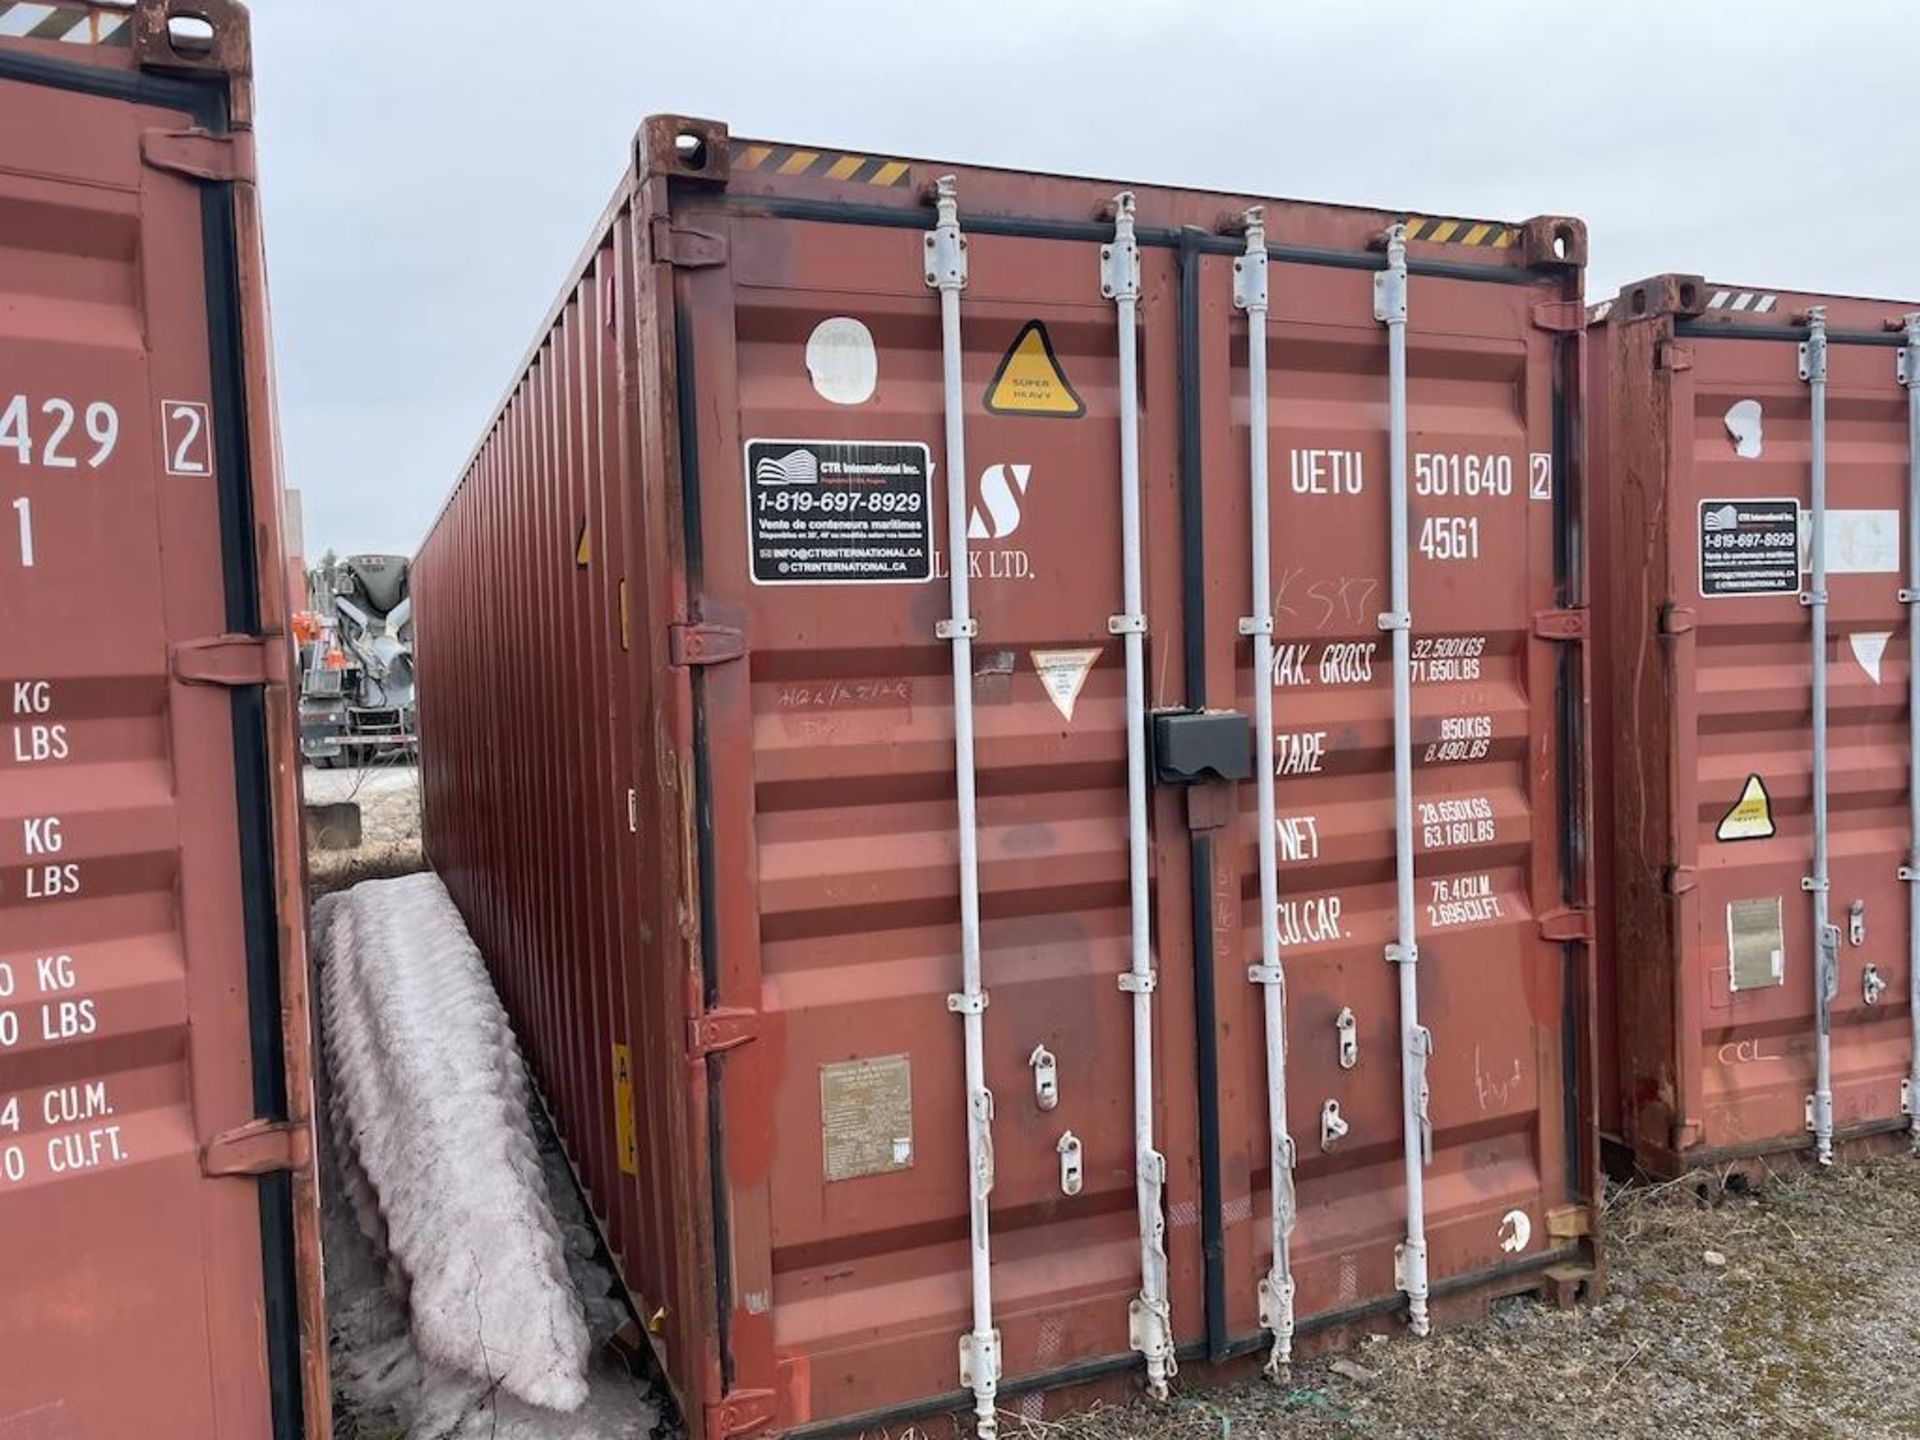 40 FT SEA CONTAINER, EXCLUDING CONTENTS, DELAYED PICK UP UNTIL MAY 13 [12] [TROIS RIVIERES] *PLEASE